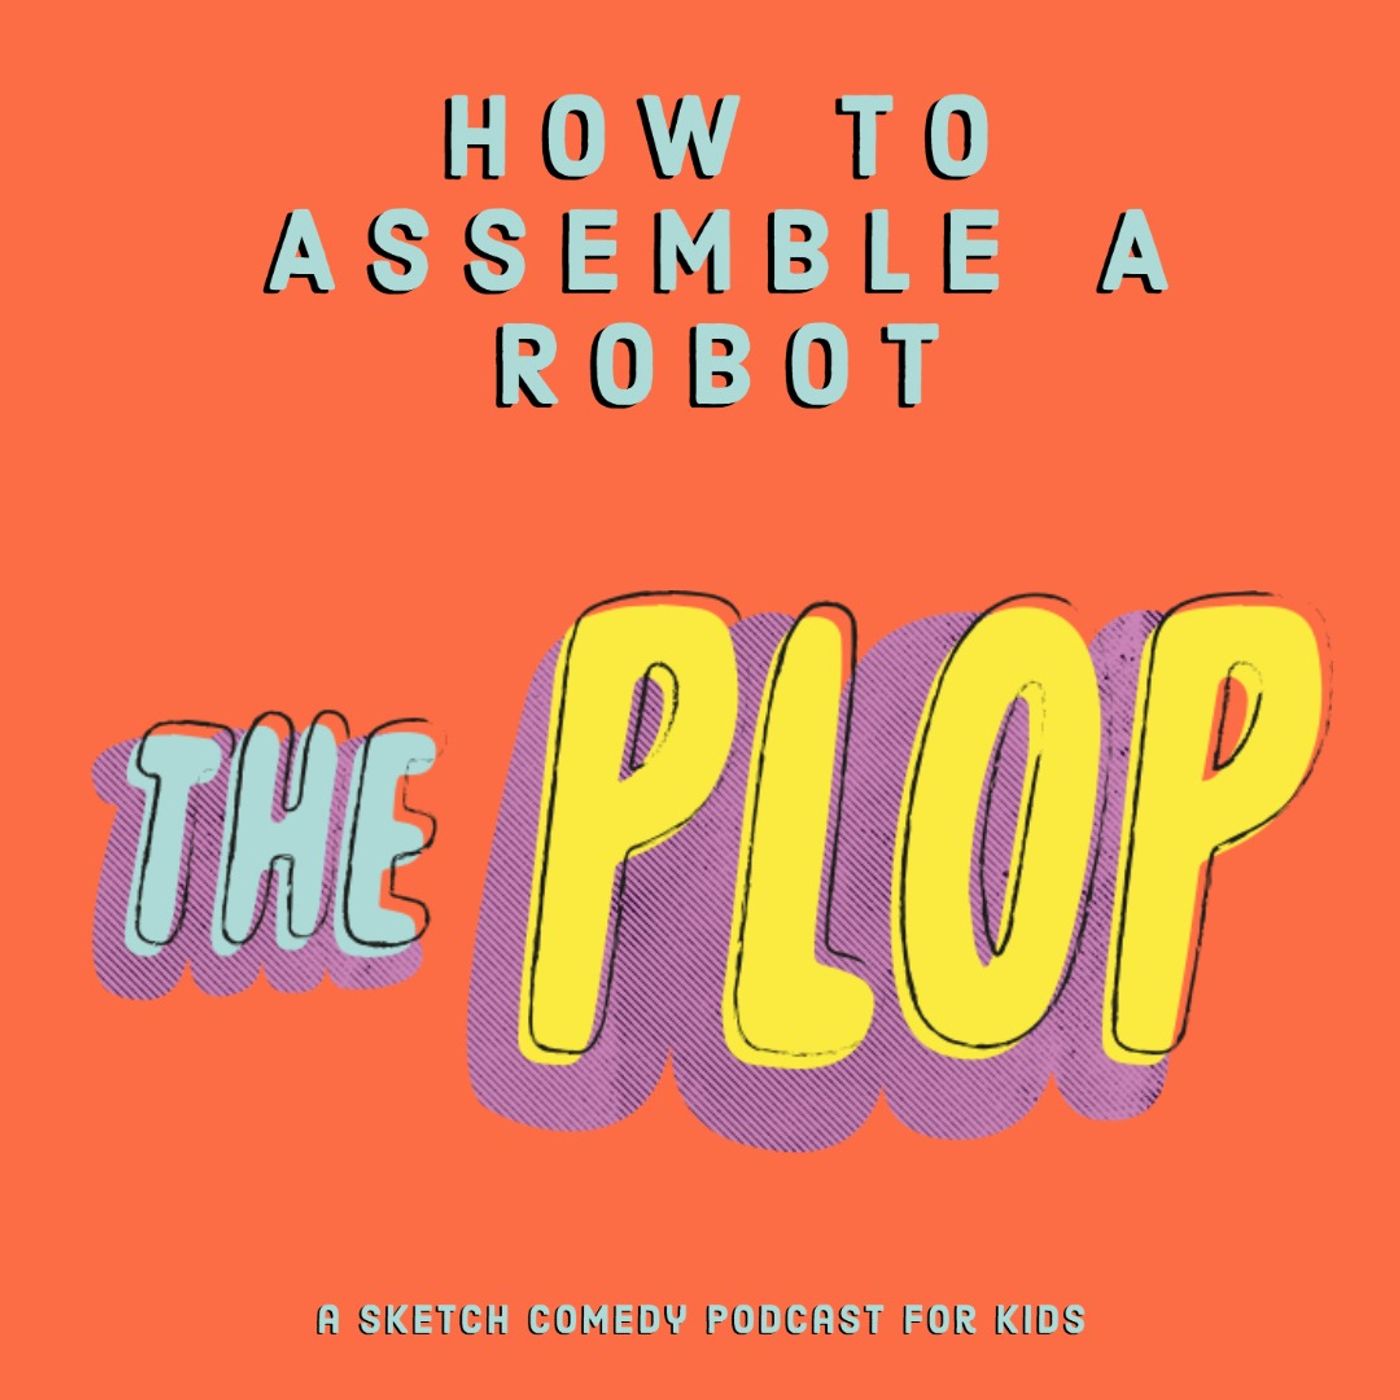 How to Assemble a Robot